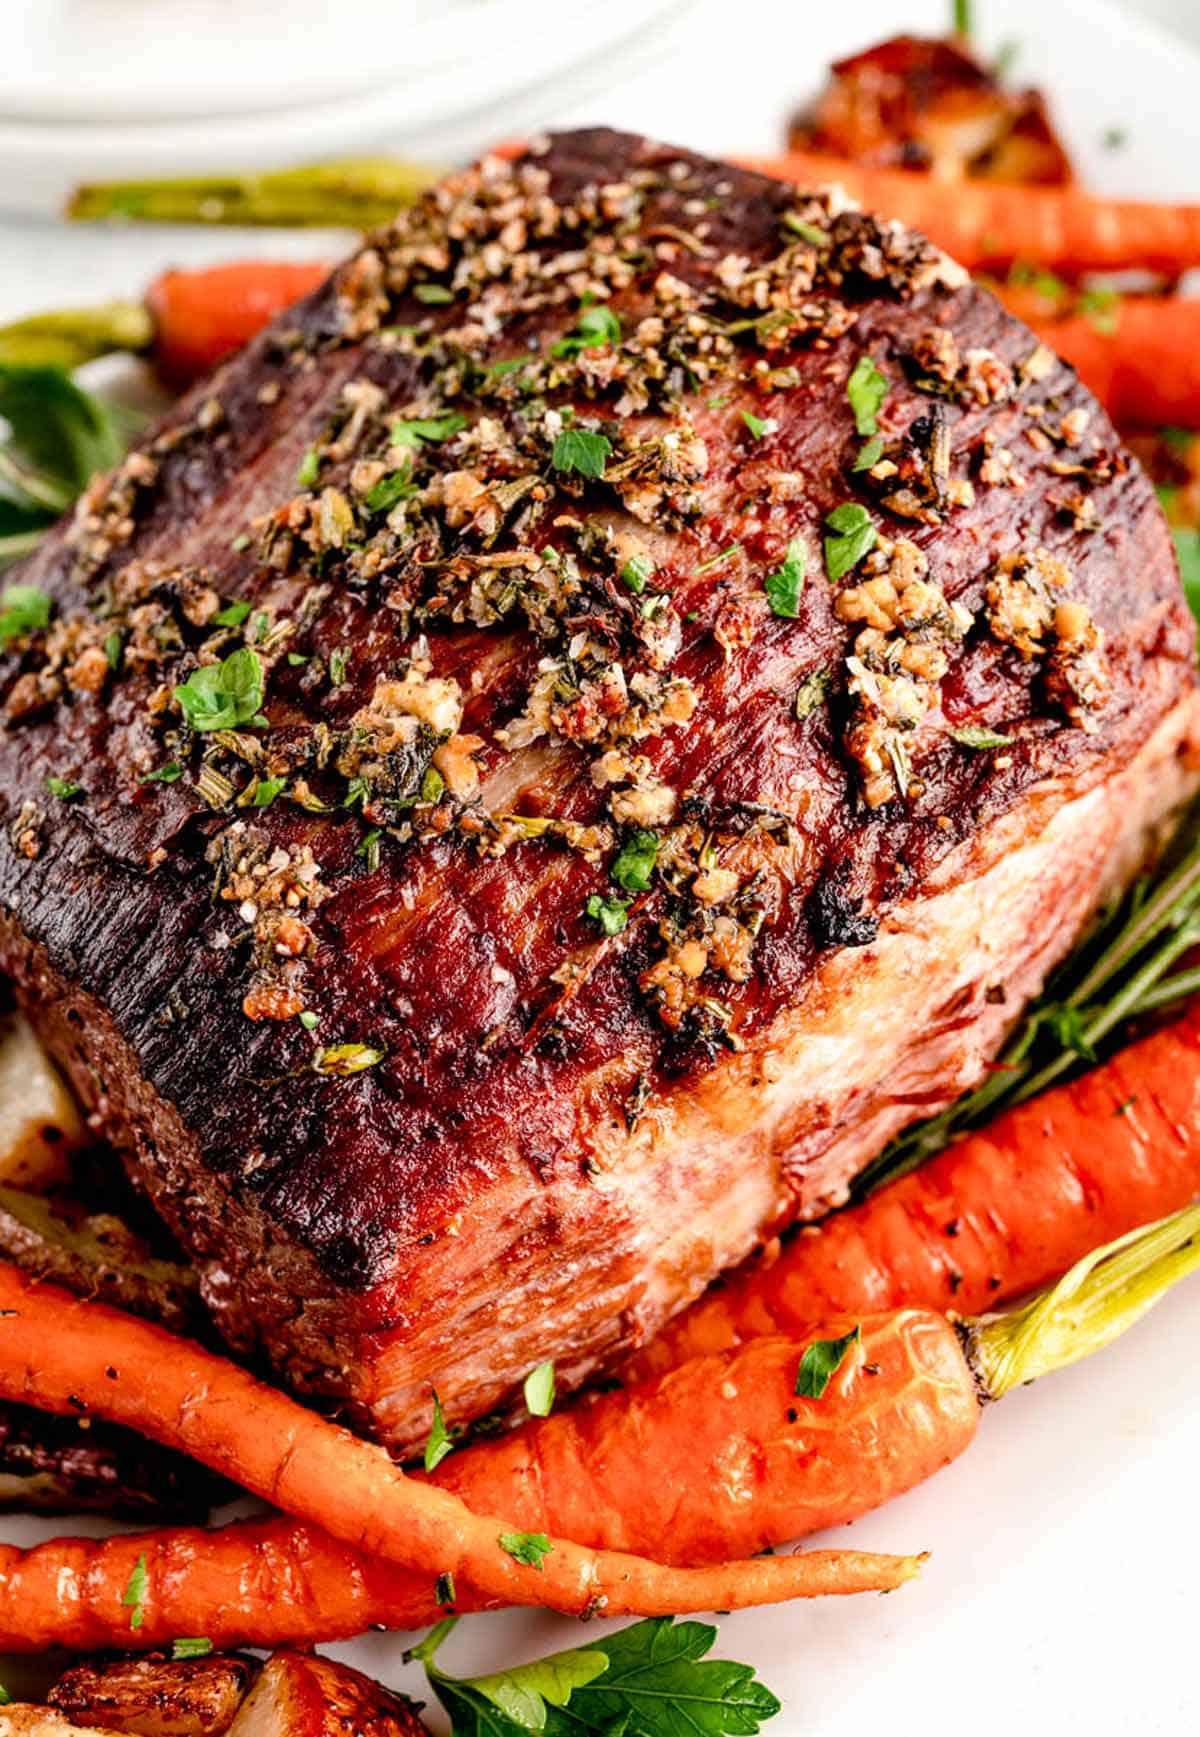 A whole roasted and uncarved Christmas roast beef with carrots.